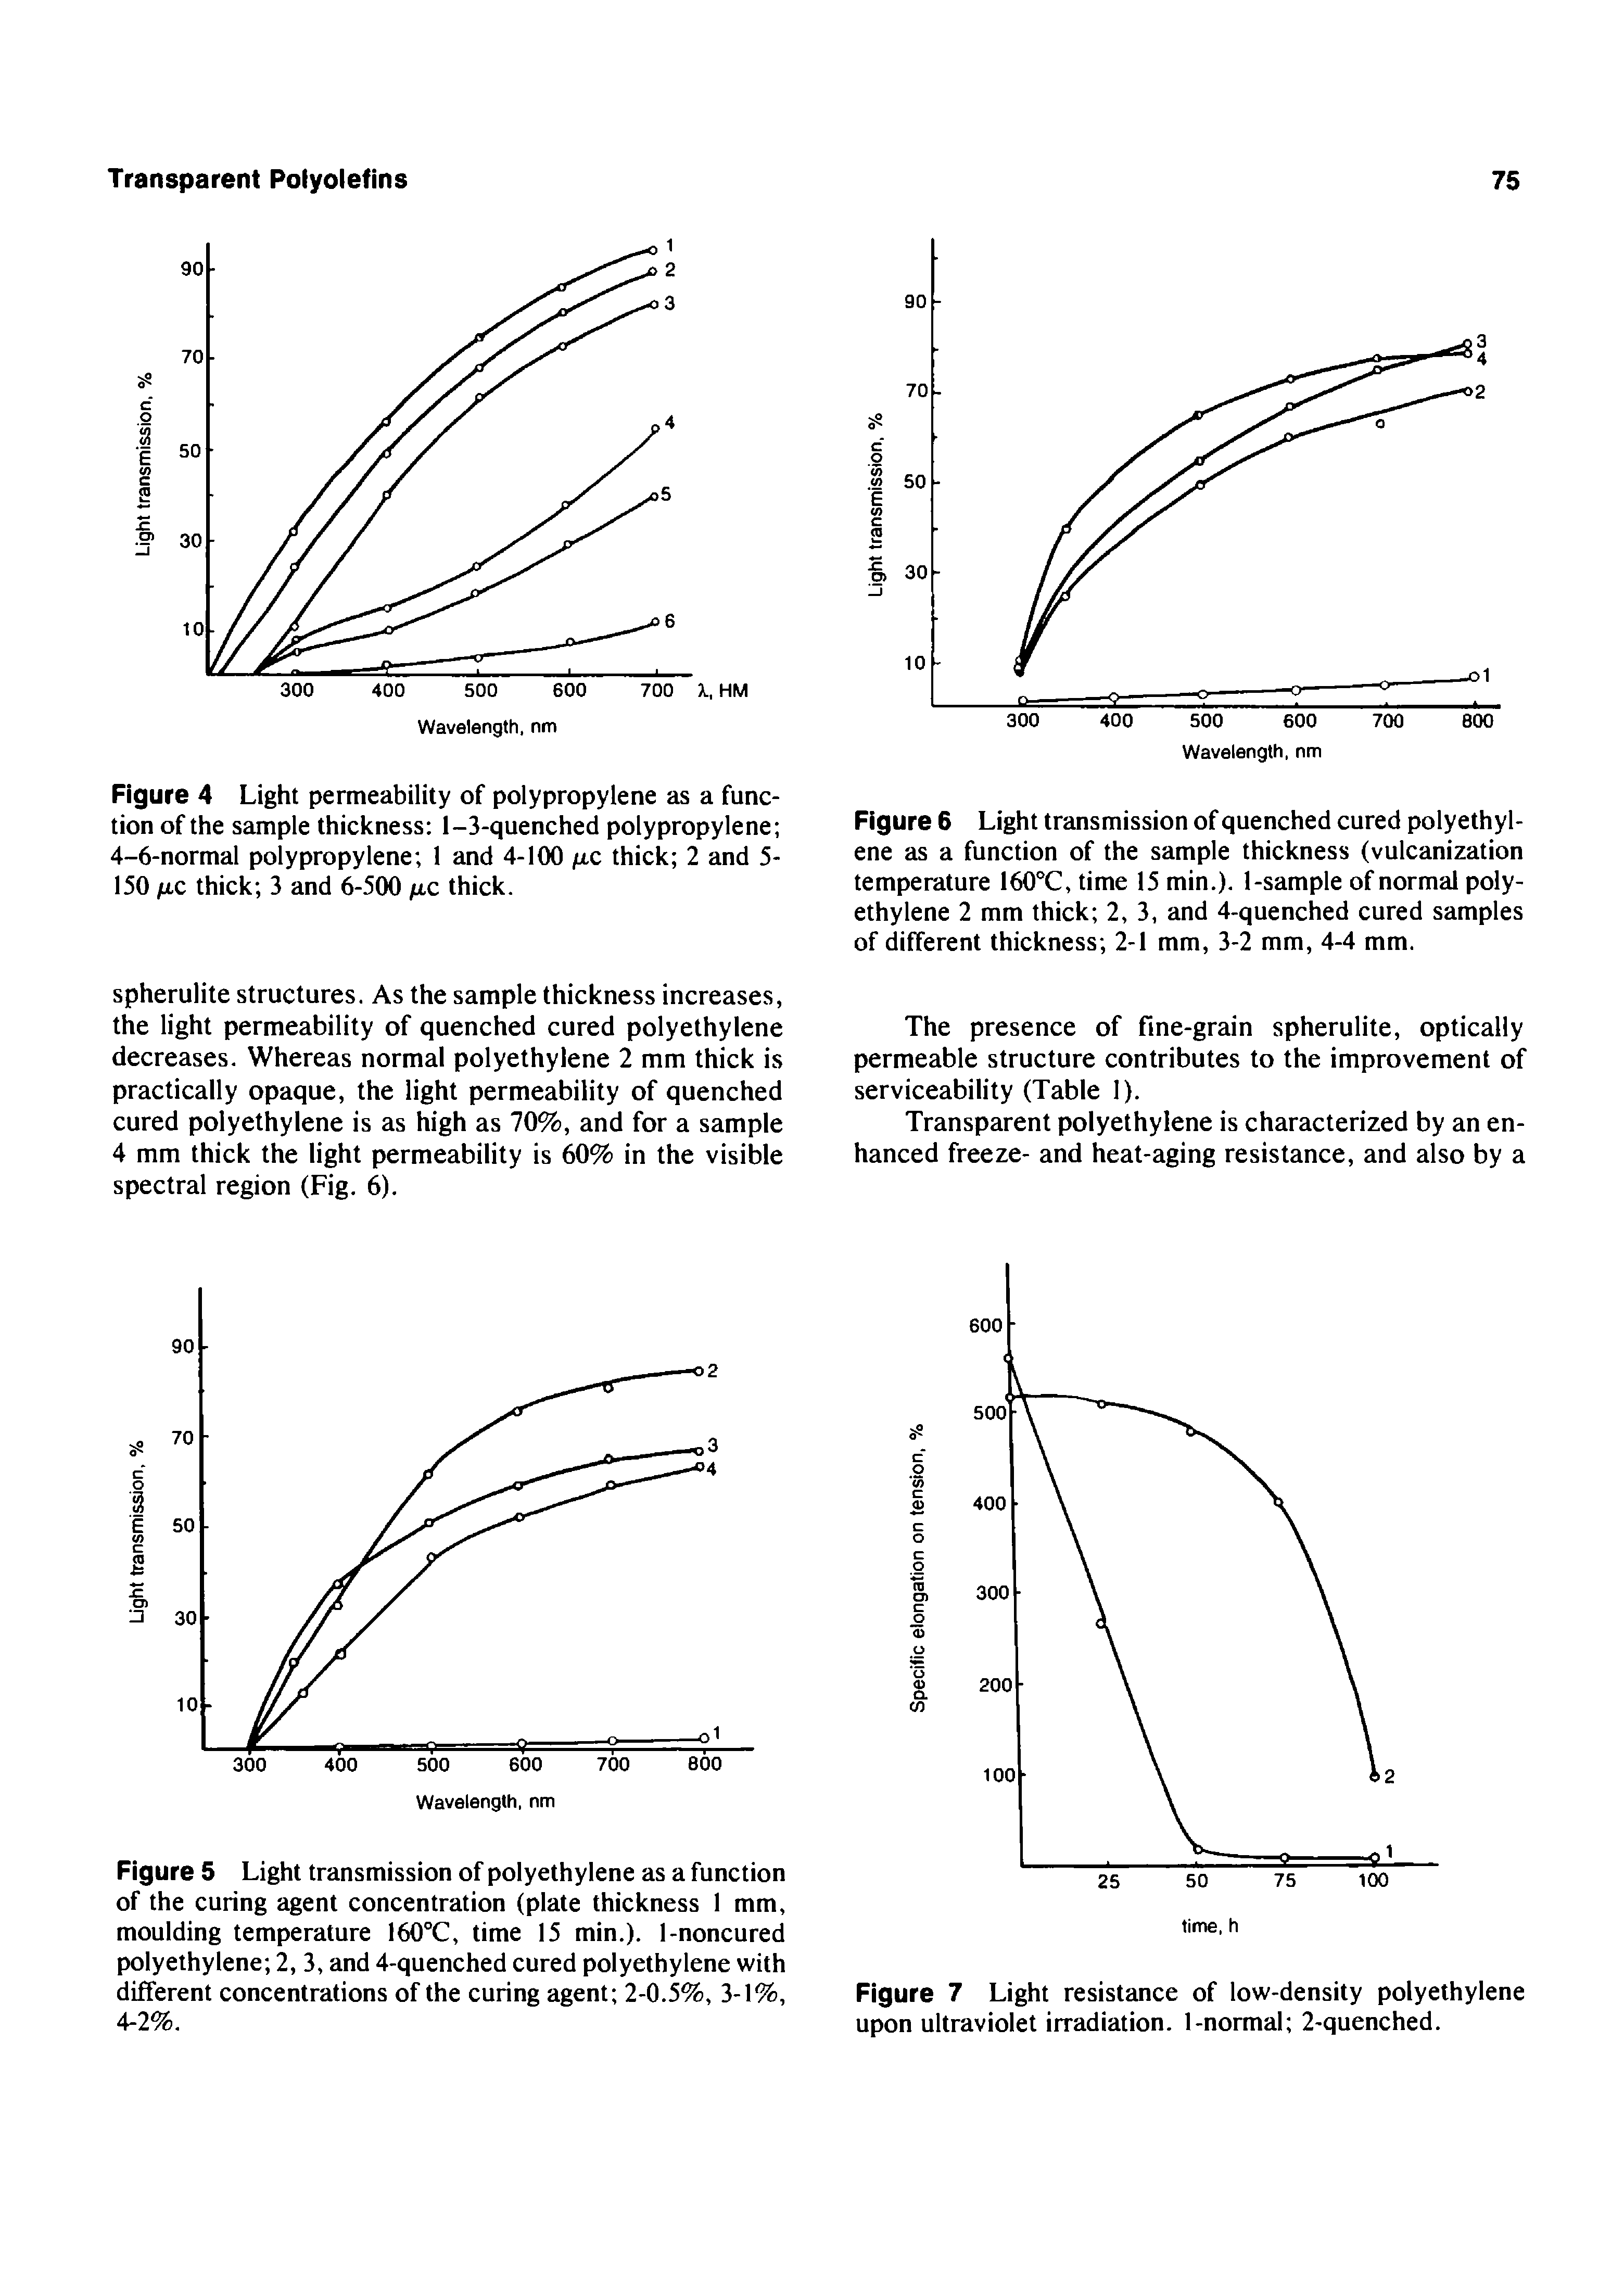 Figure 4 Light permeability of polypropylene as a function of the sample thickness 1-3-quenched polypropylene 4-6-normal polypropylene 1 and 4-100 /ac thick 2 and 5-150 jLtc thick 3 and 6-500 /jlc thick.